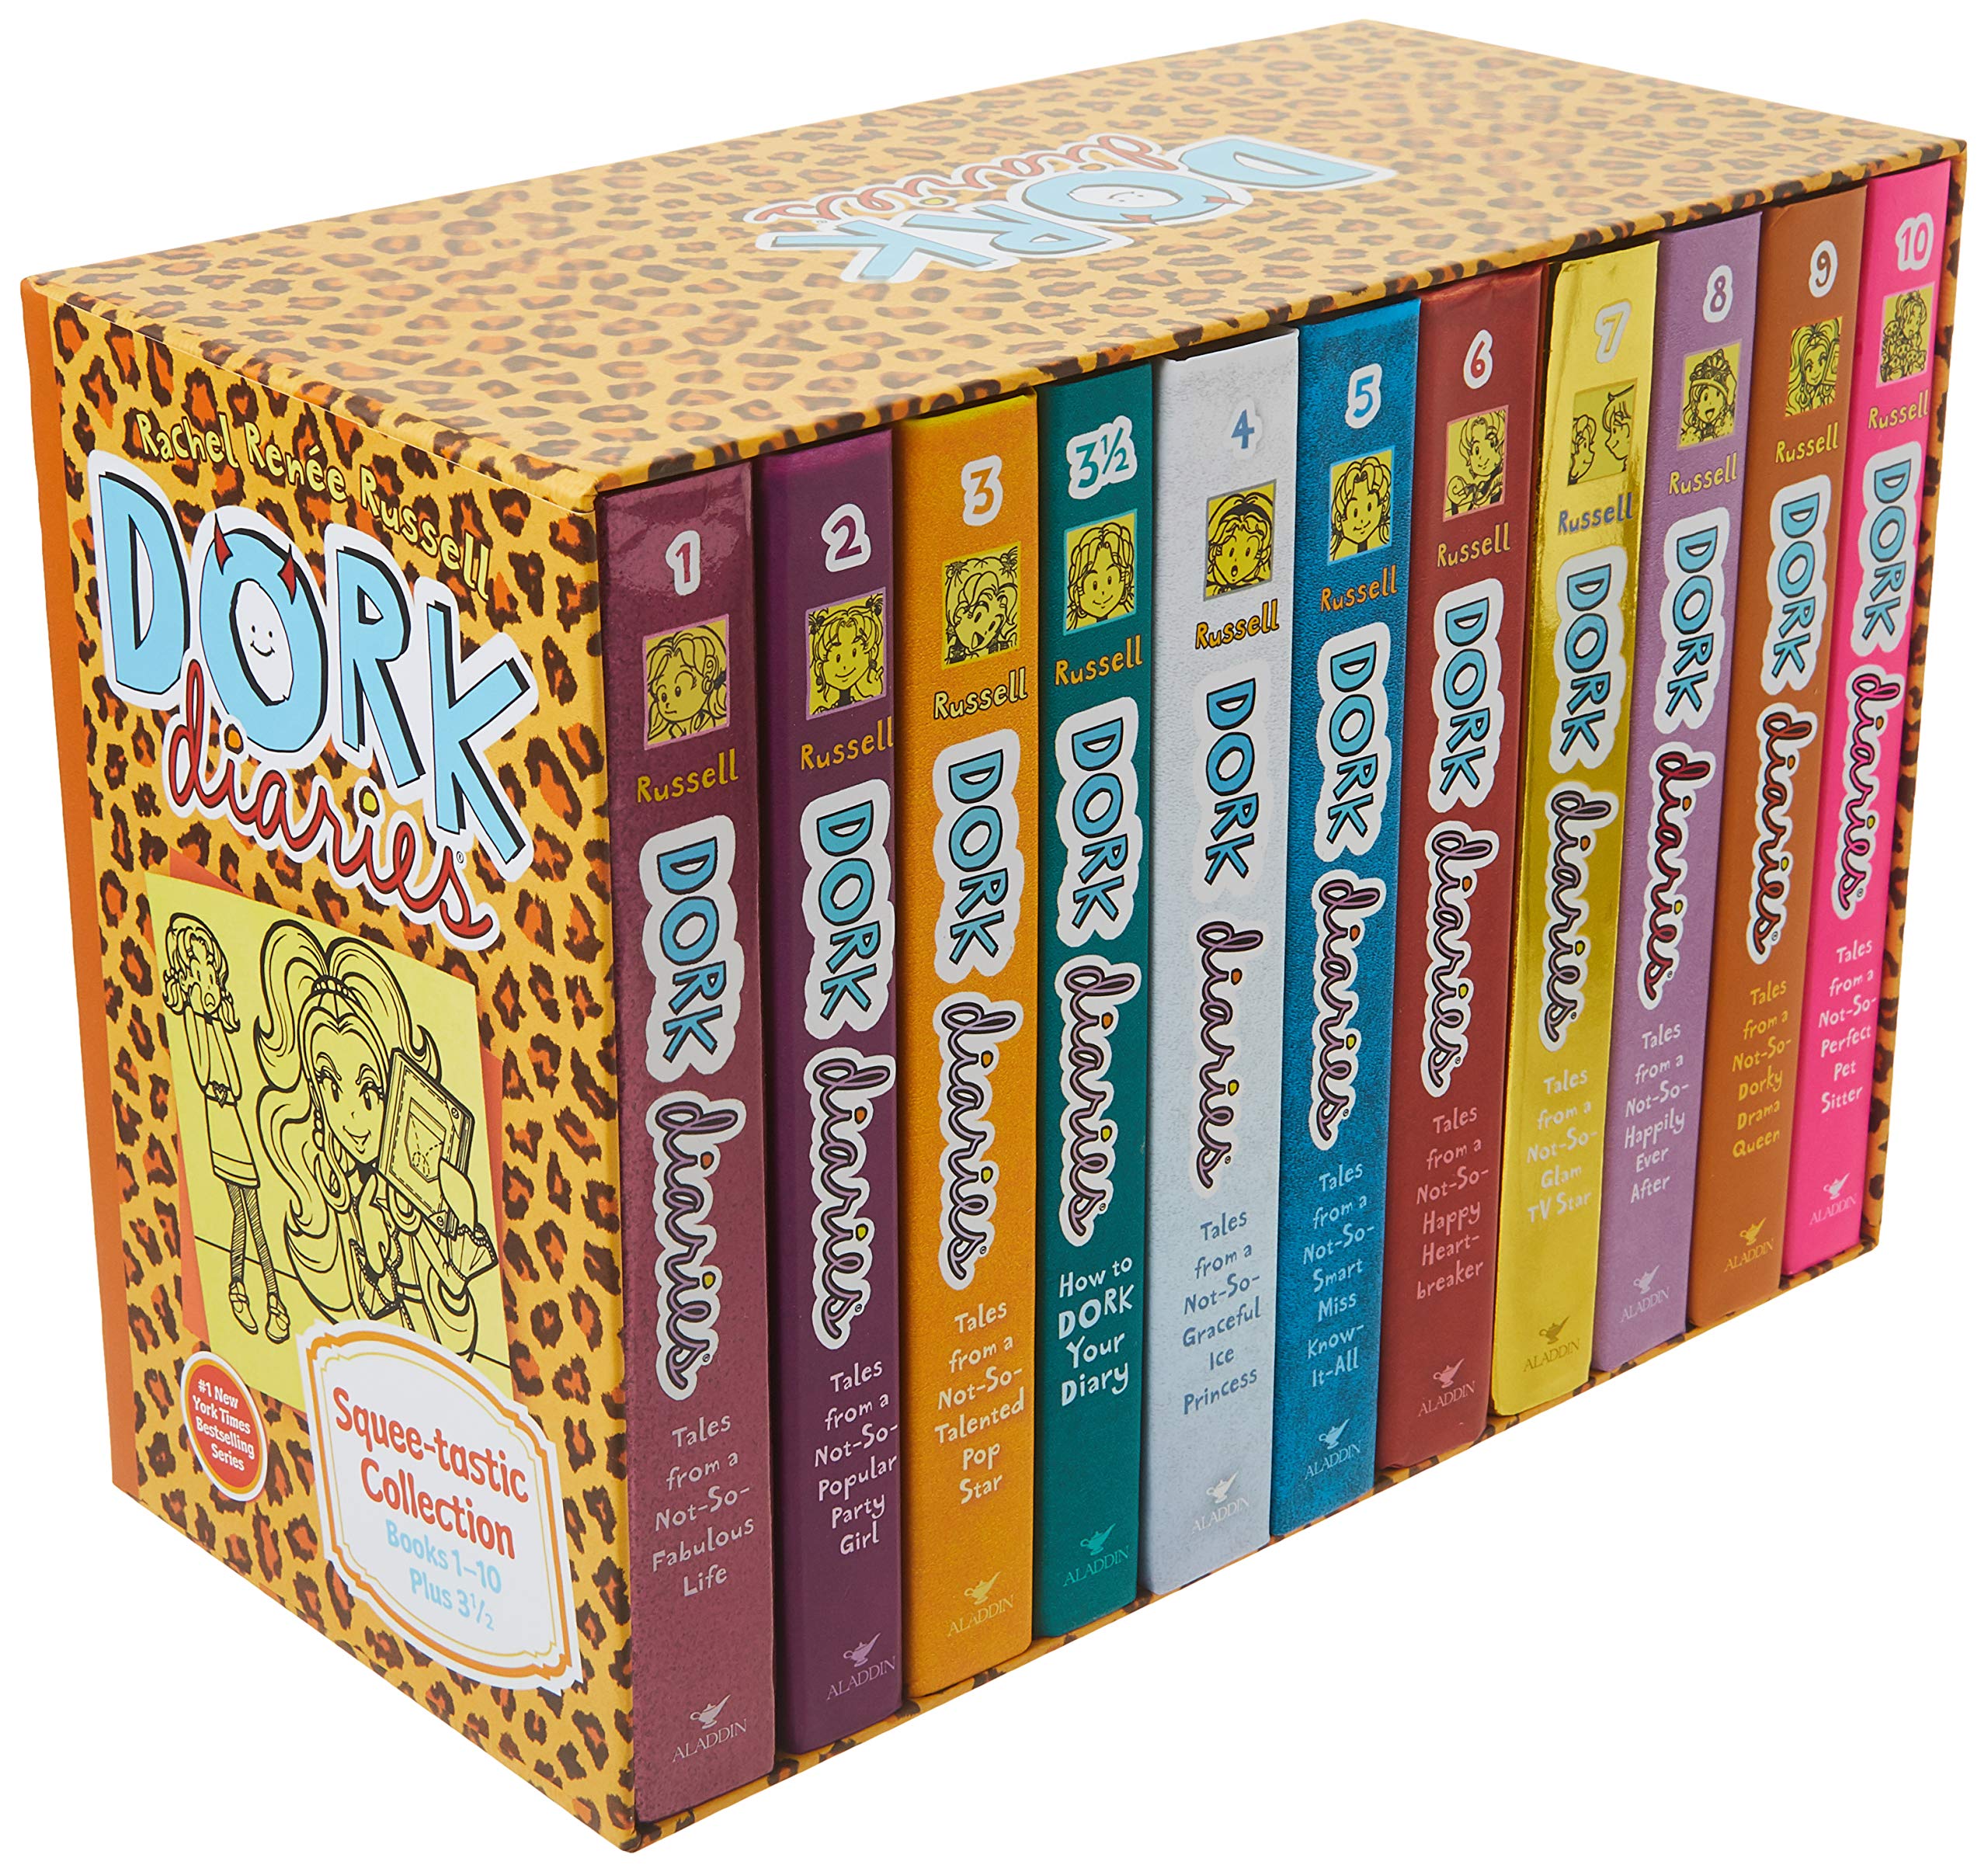 Dork Diaries Squee-tastic Collection Box Set - The Comic Warehouse